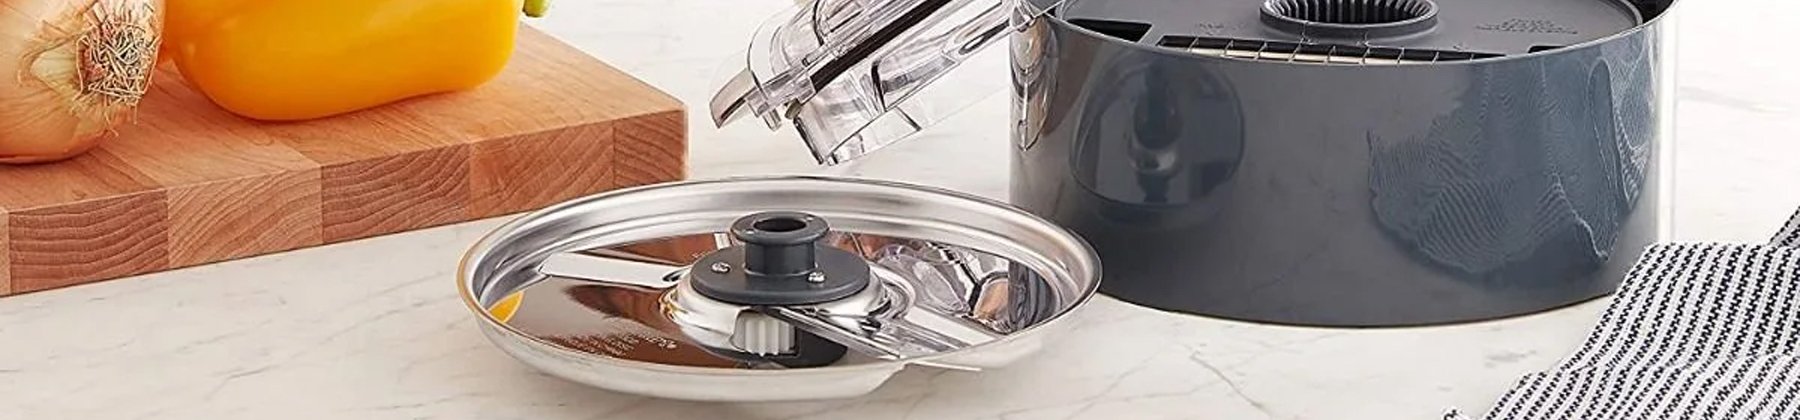 https://cdn.everythingkitchens.com/media/wysiwyg/images/Category_Headers/Food-Processor-Parts-and-Accessories.jpg